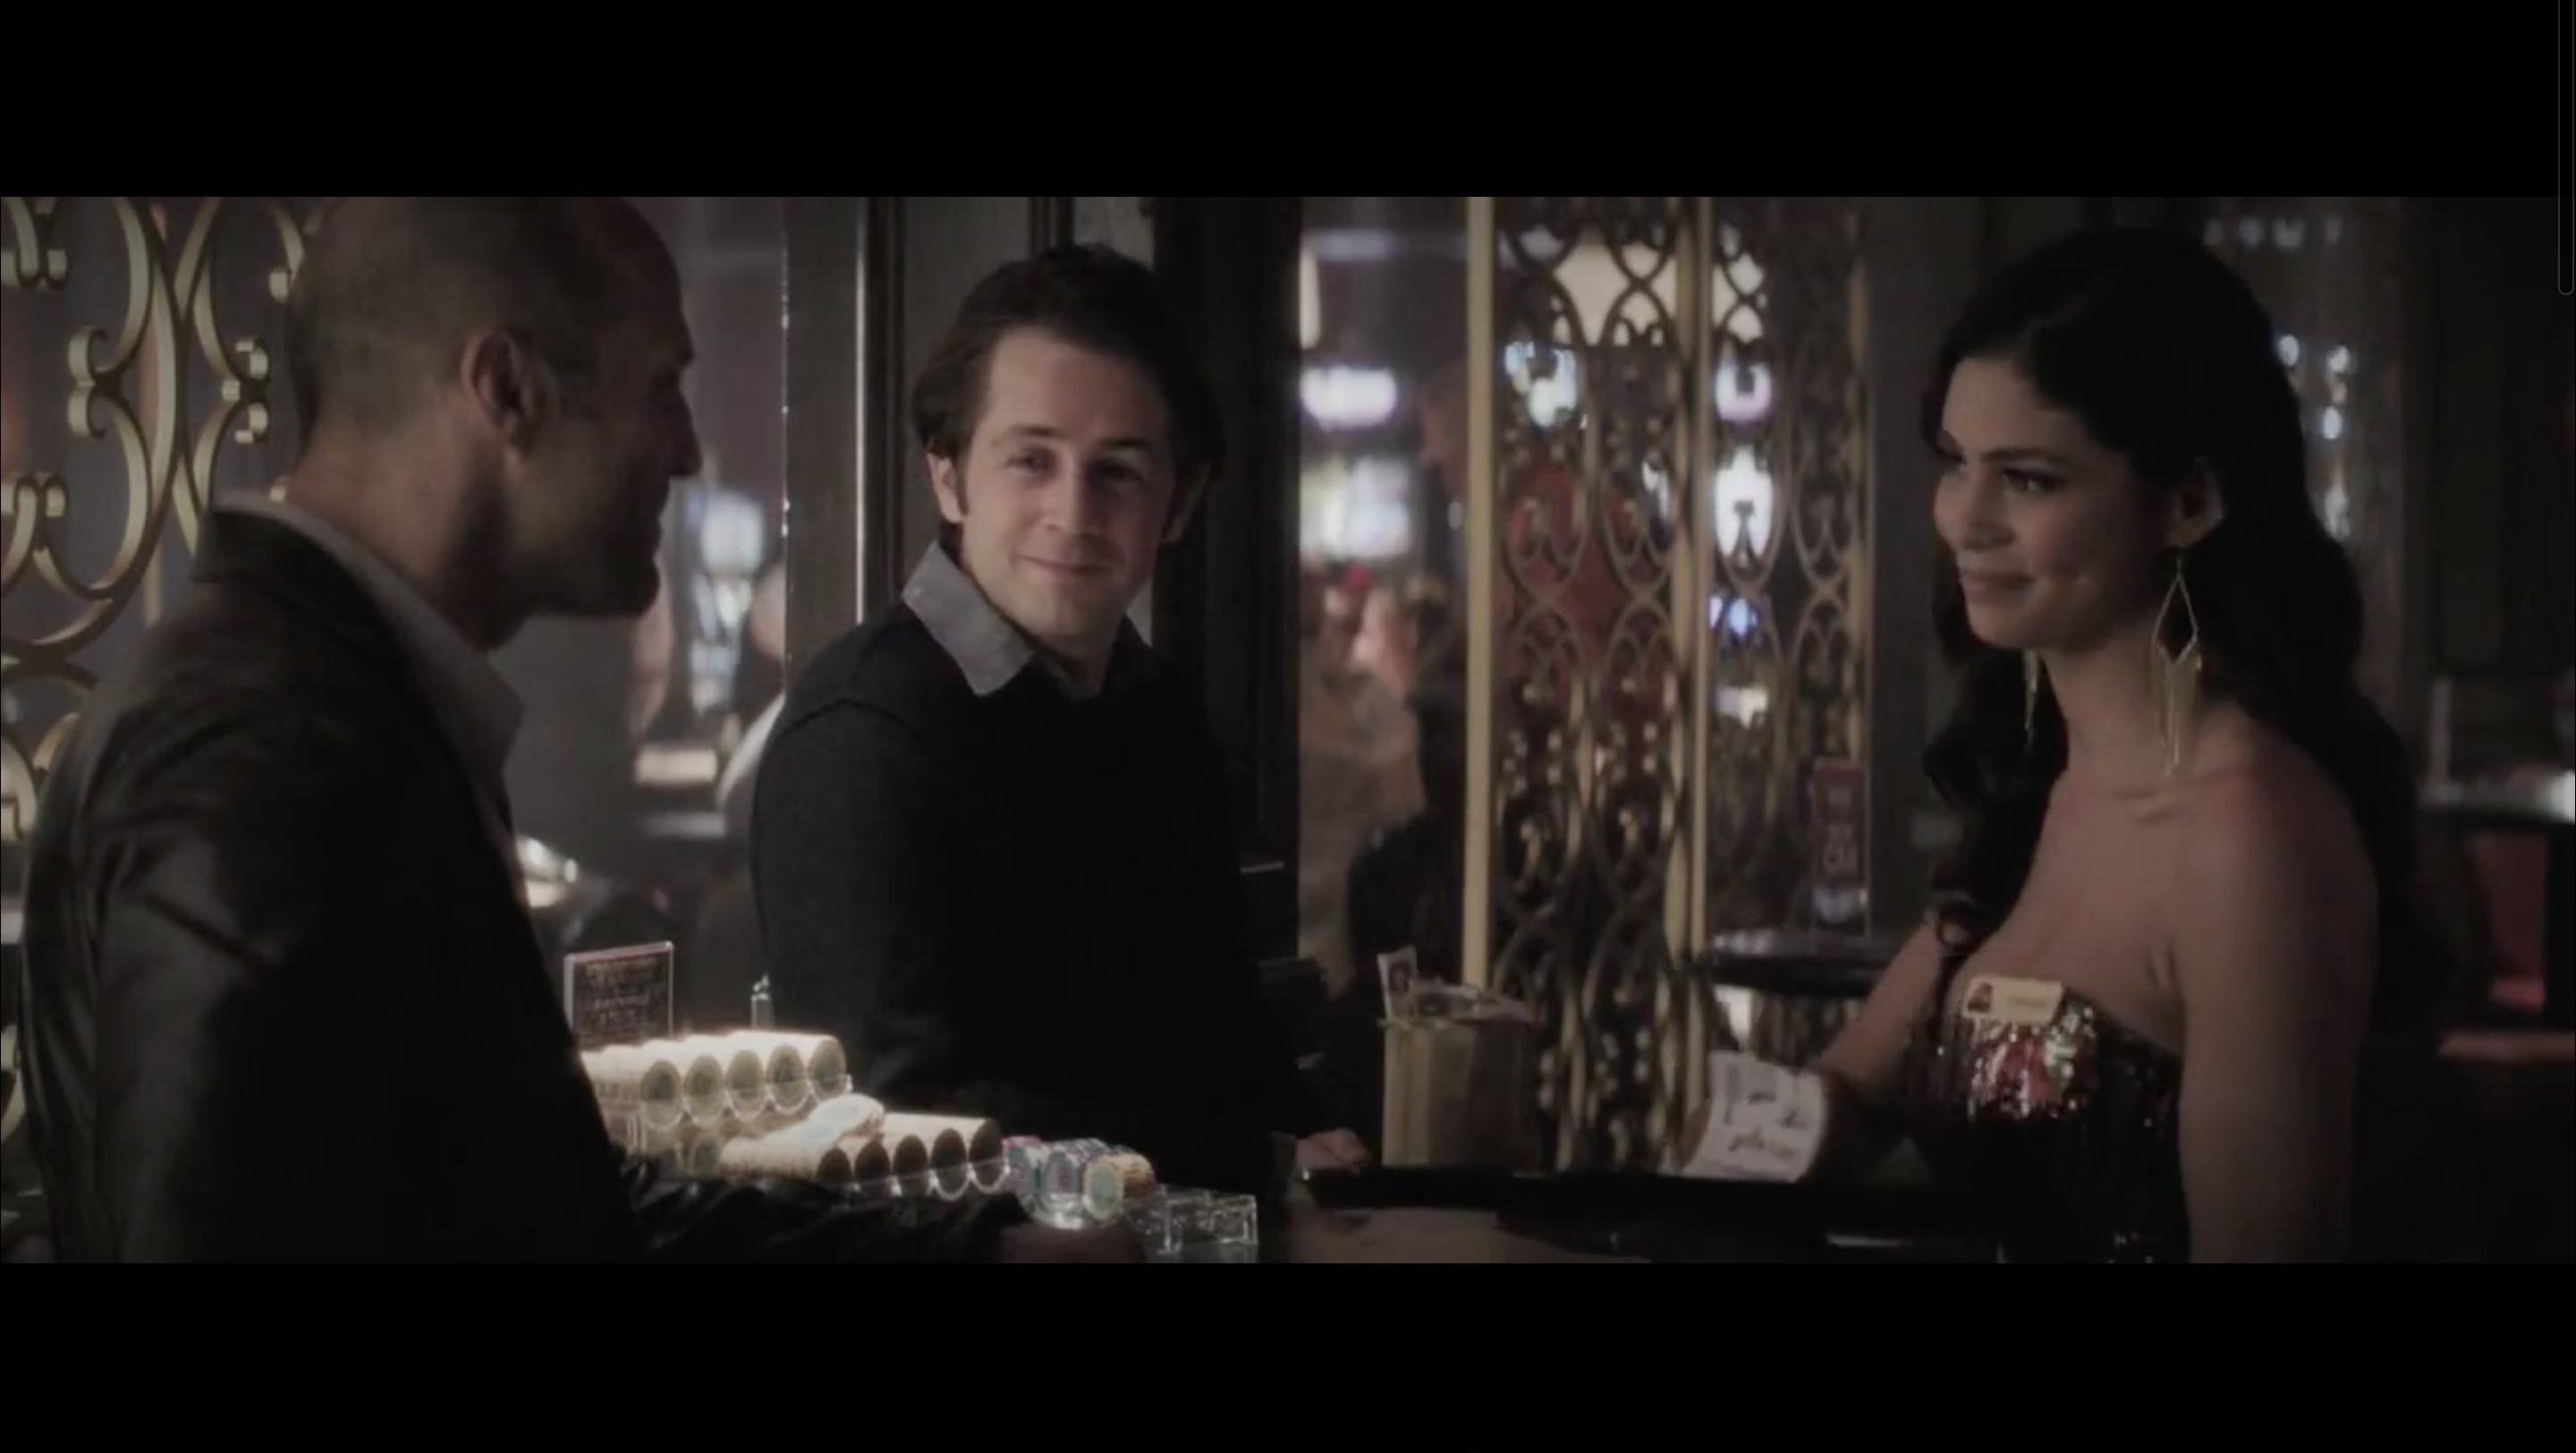 Screen shot from movie Wild Card with jason Statham and Michael Angarano